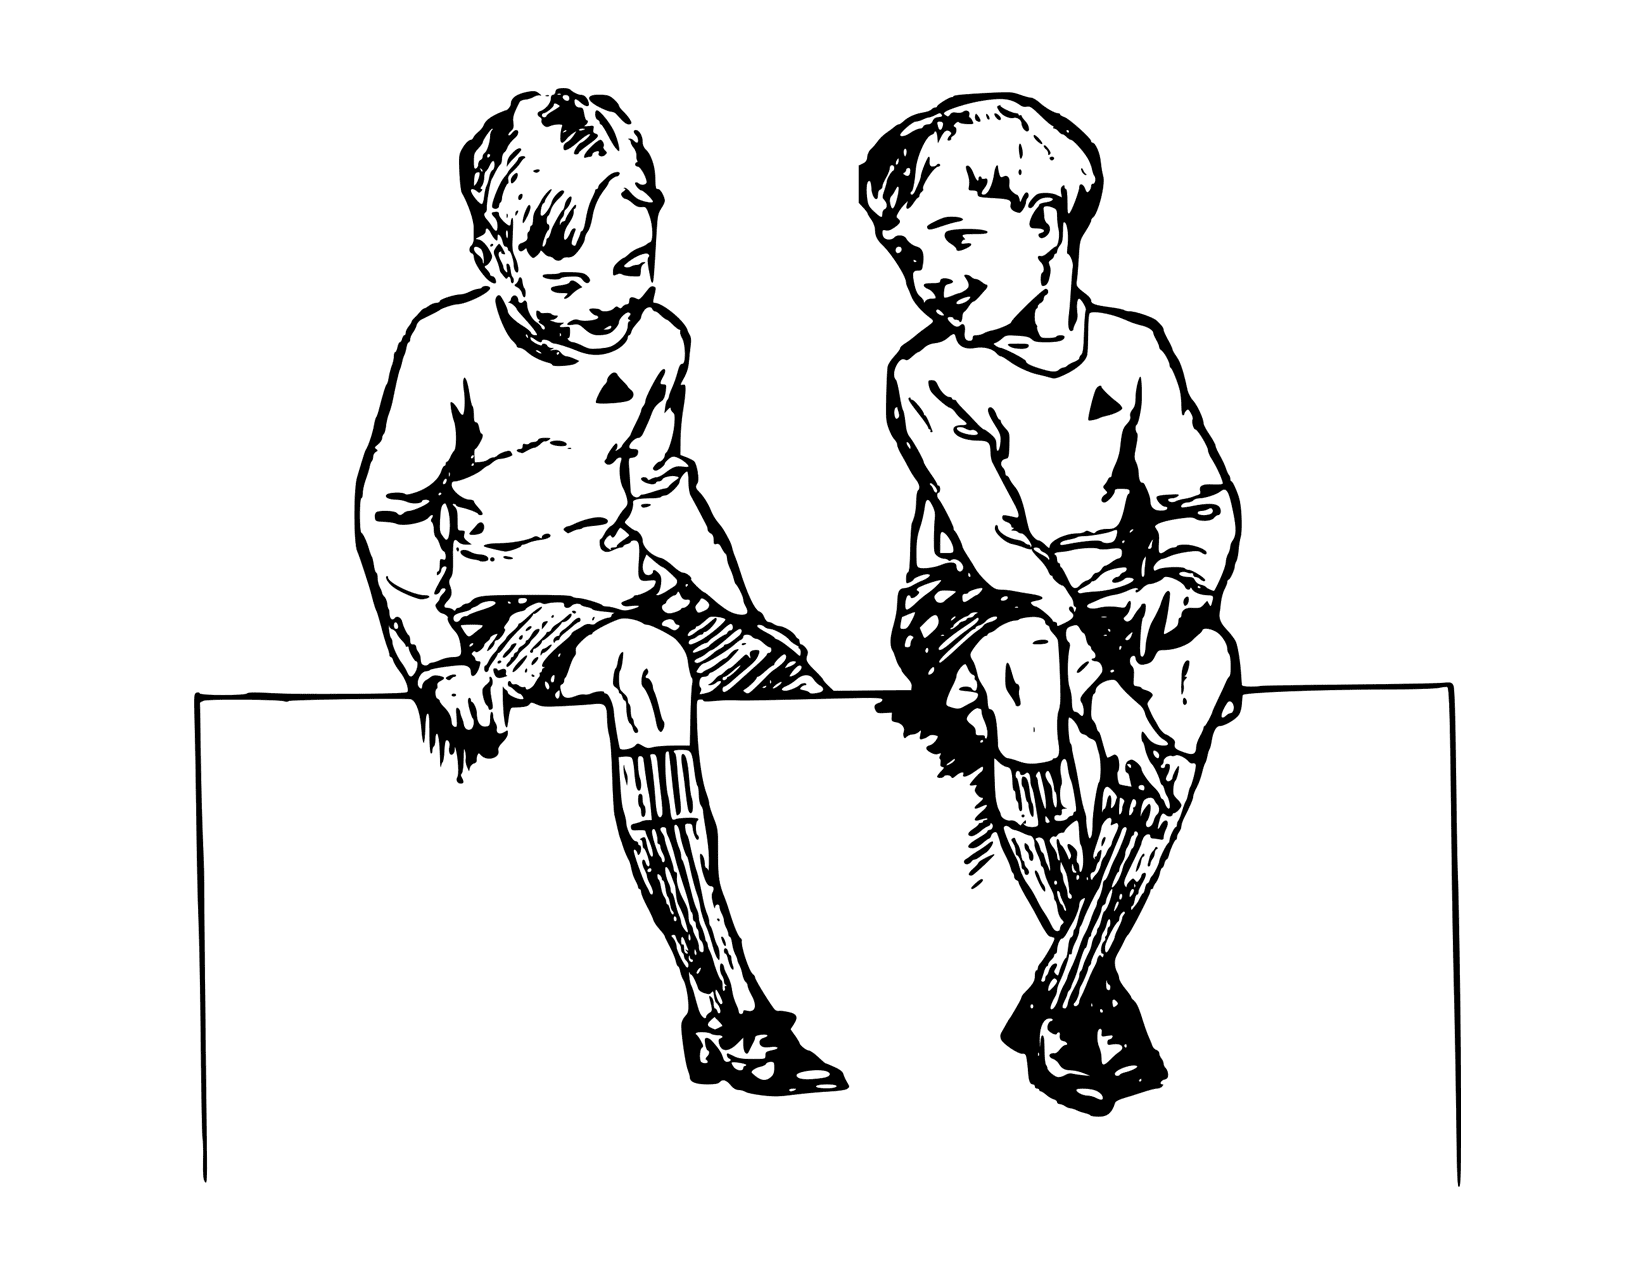 Friendship Two Boys Coloring Page